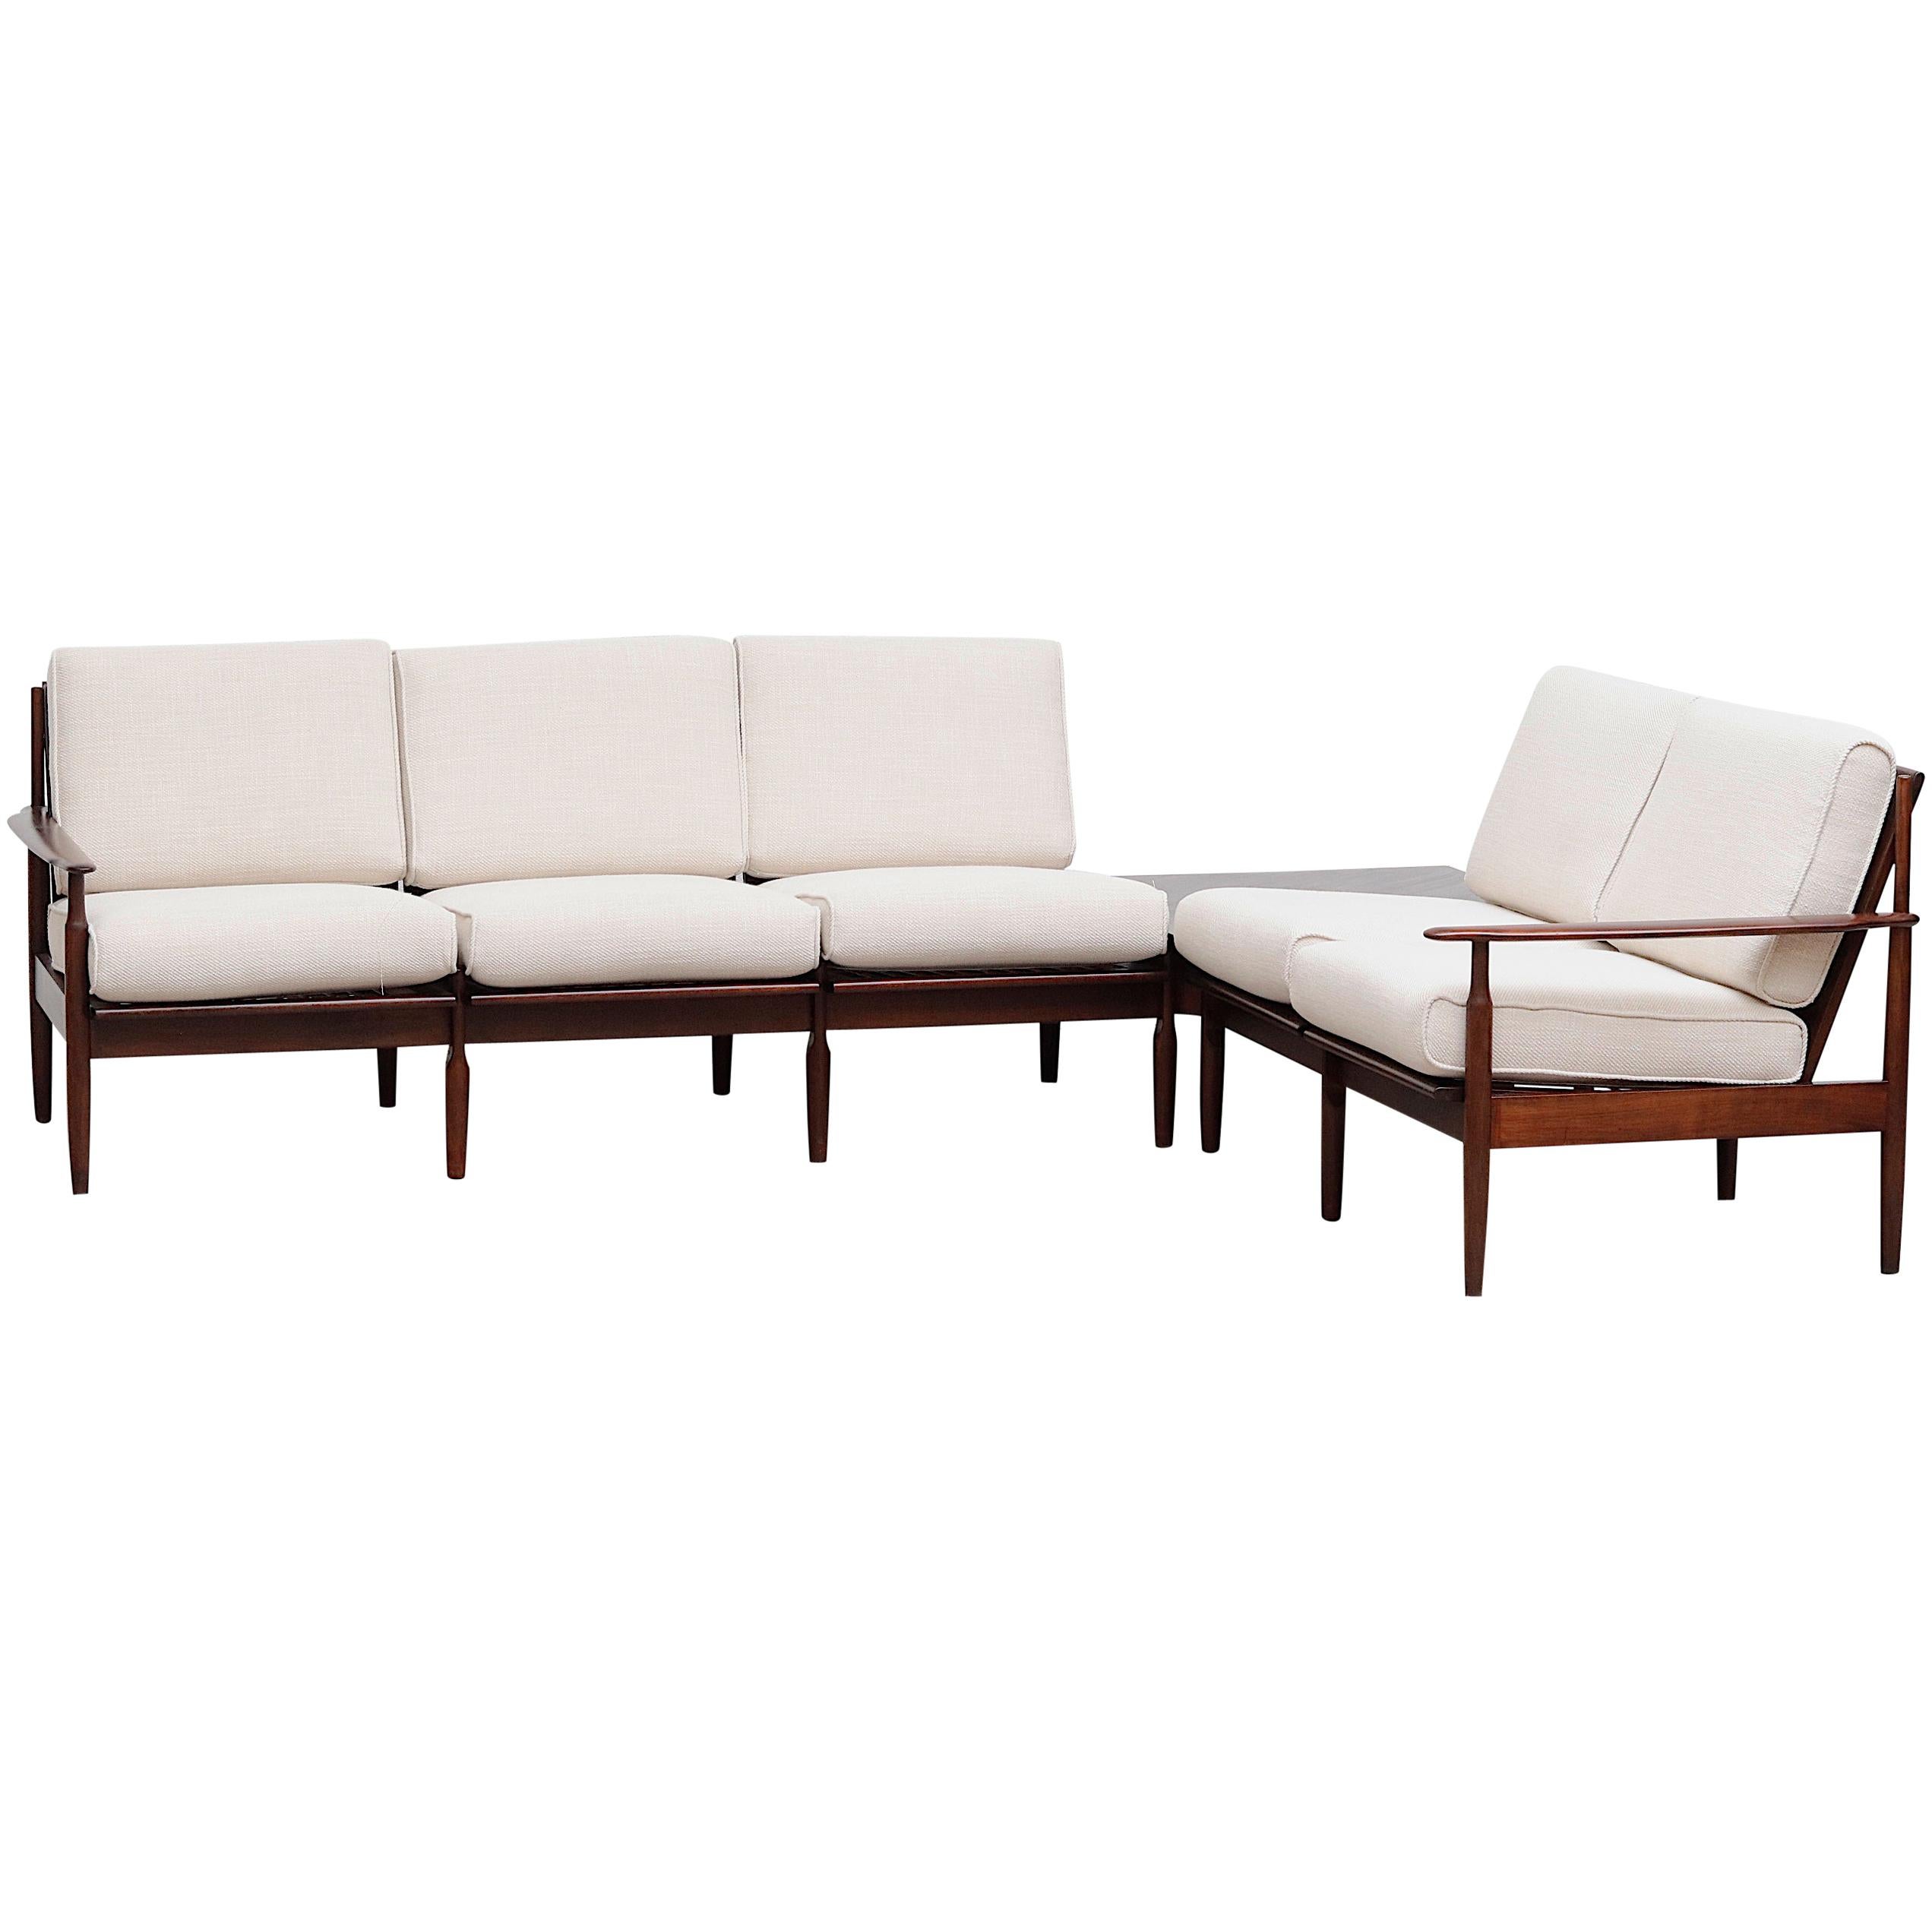 Kristian Vedel Style Sectional Sofa Suite